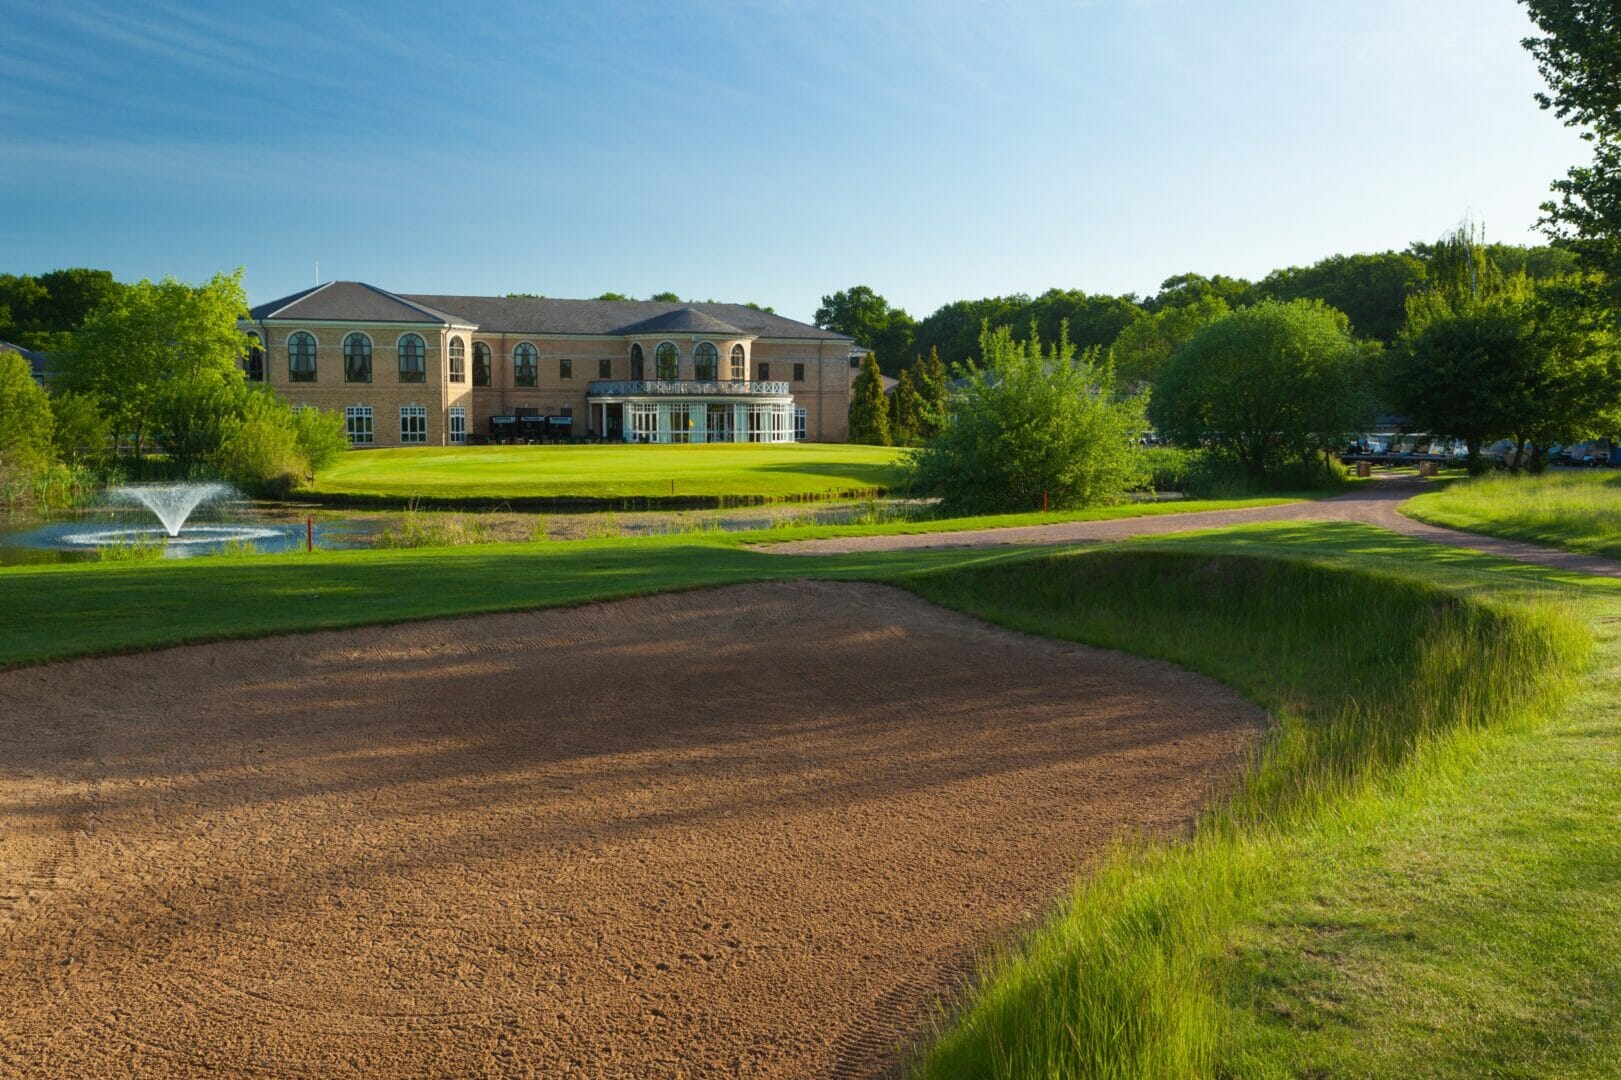 ROUND OFF YOUR SUMMER WITH THIS INCREDIBLE GOLF BREAK OFFER FROM THE QHOTELS COLLECTION